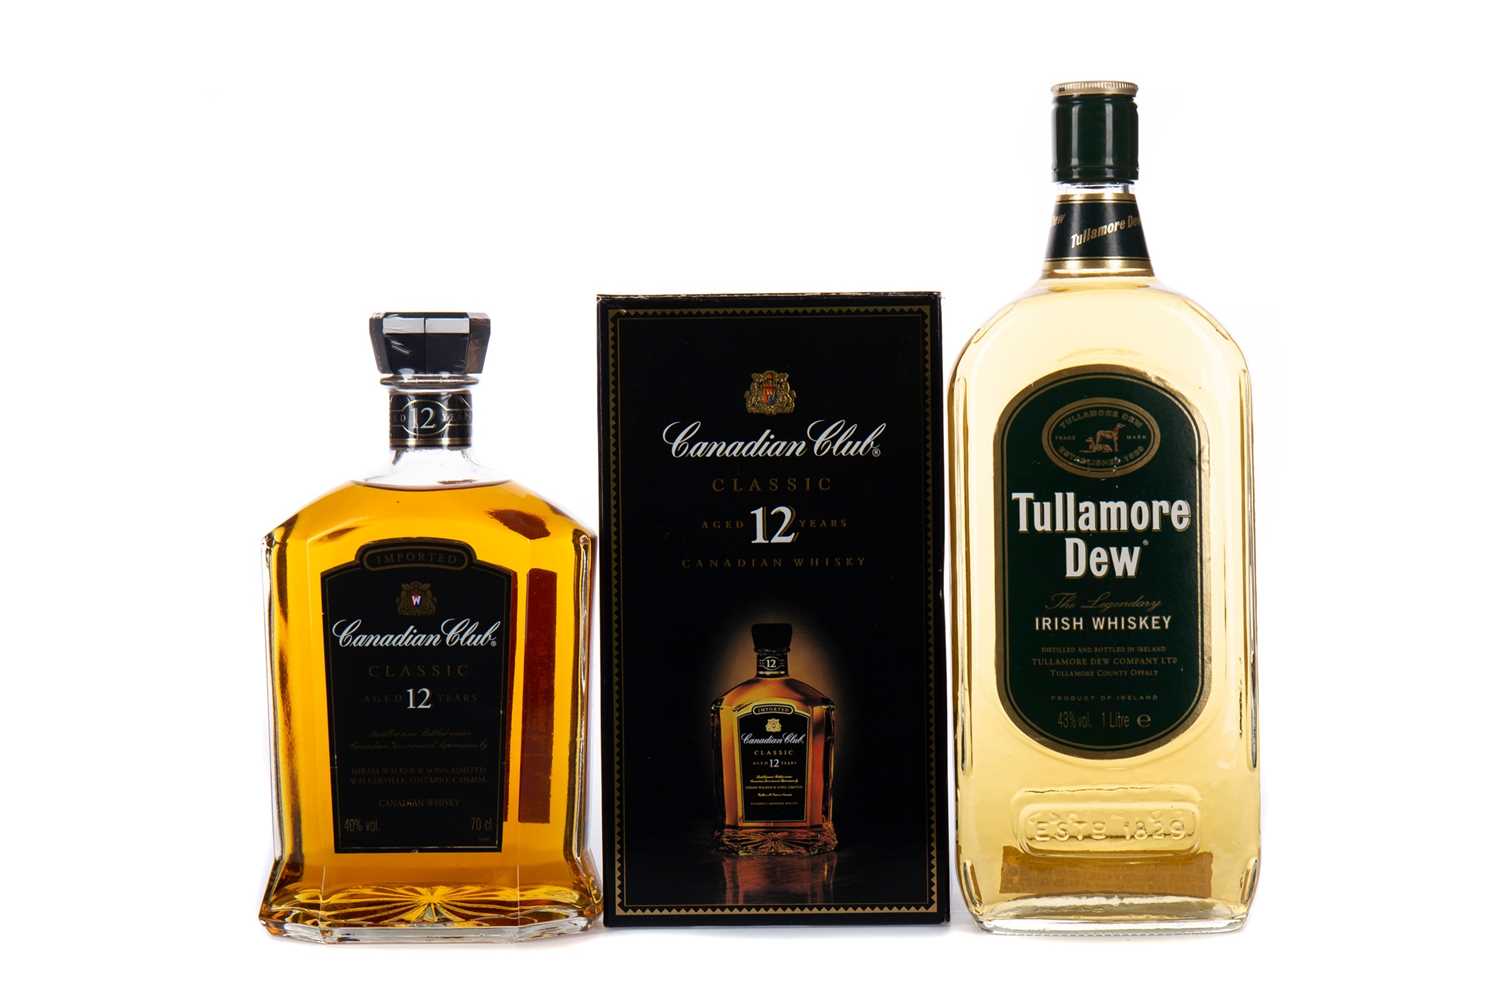 Lot 7 - CANADIAN CLUB AGED 12 YEARS AND TULLAMORE DEW